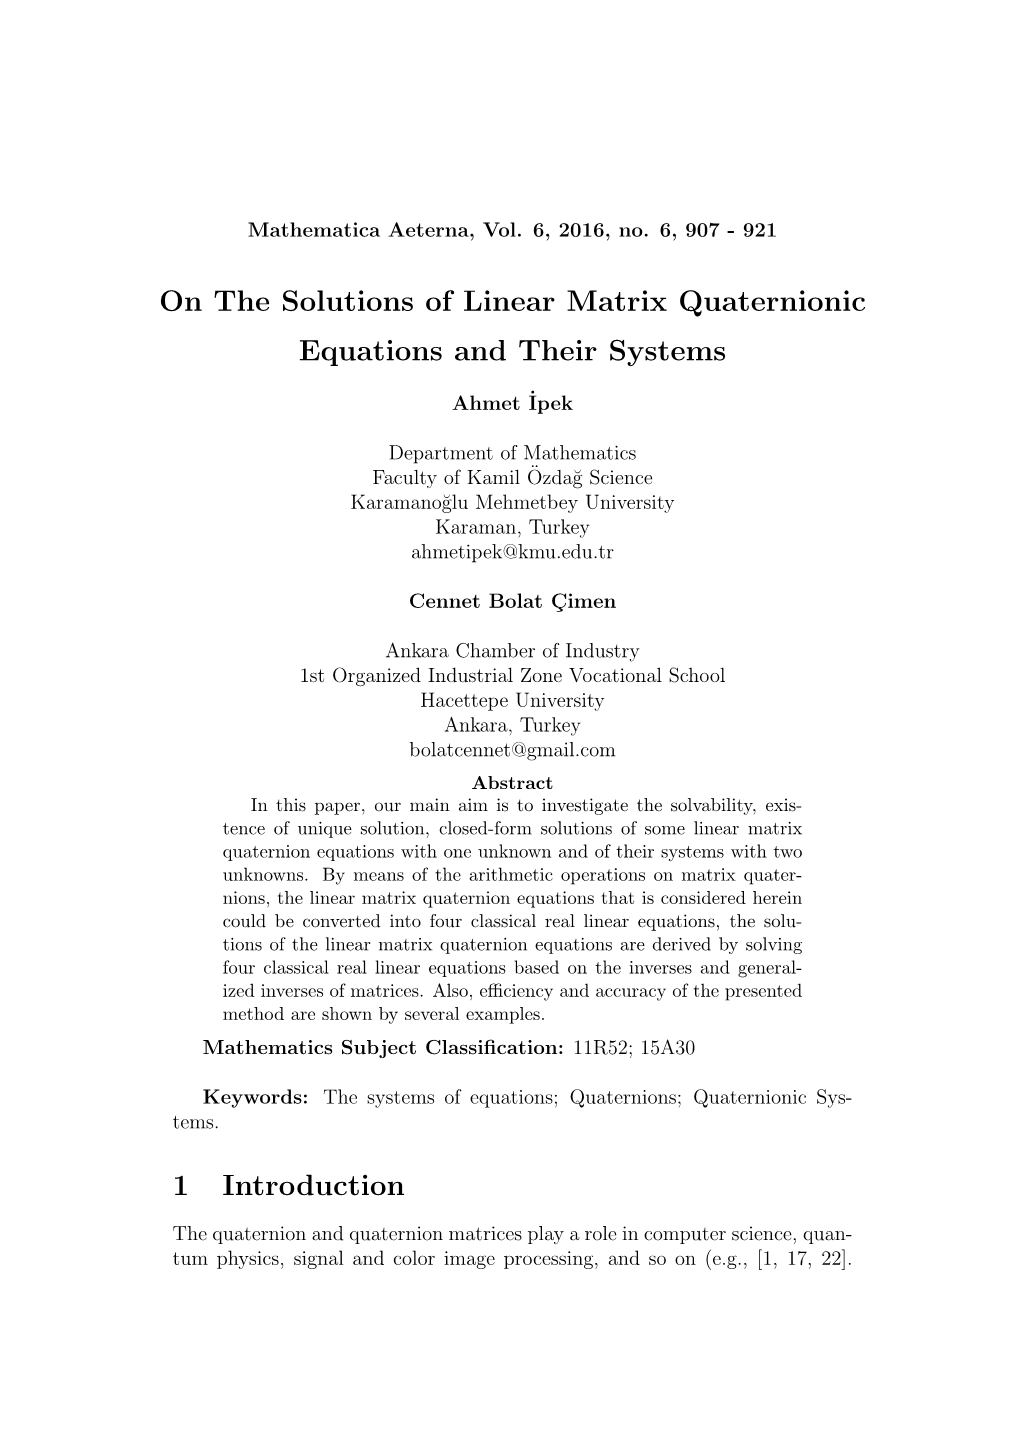 On the Solutions of Linear Matrix Quaternionic Equations and Their Systems